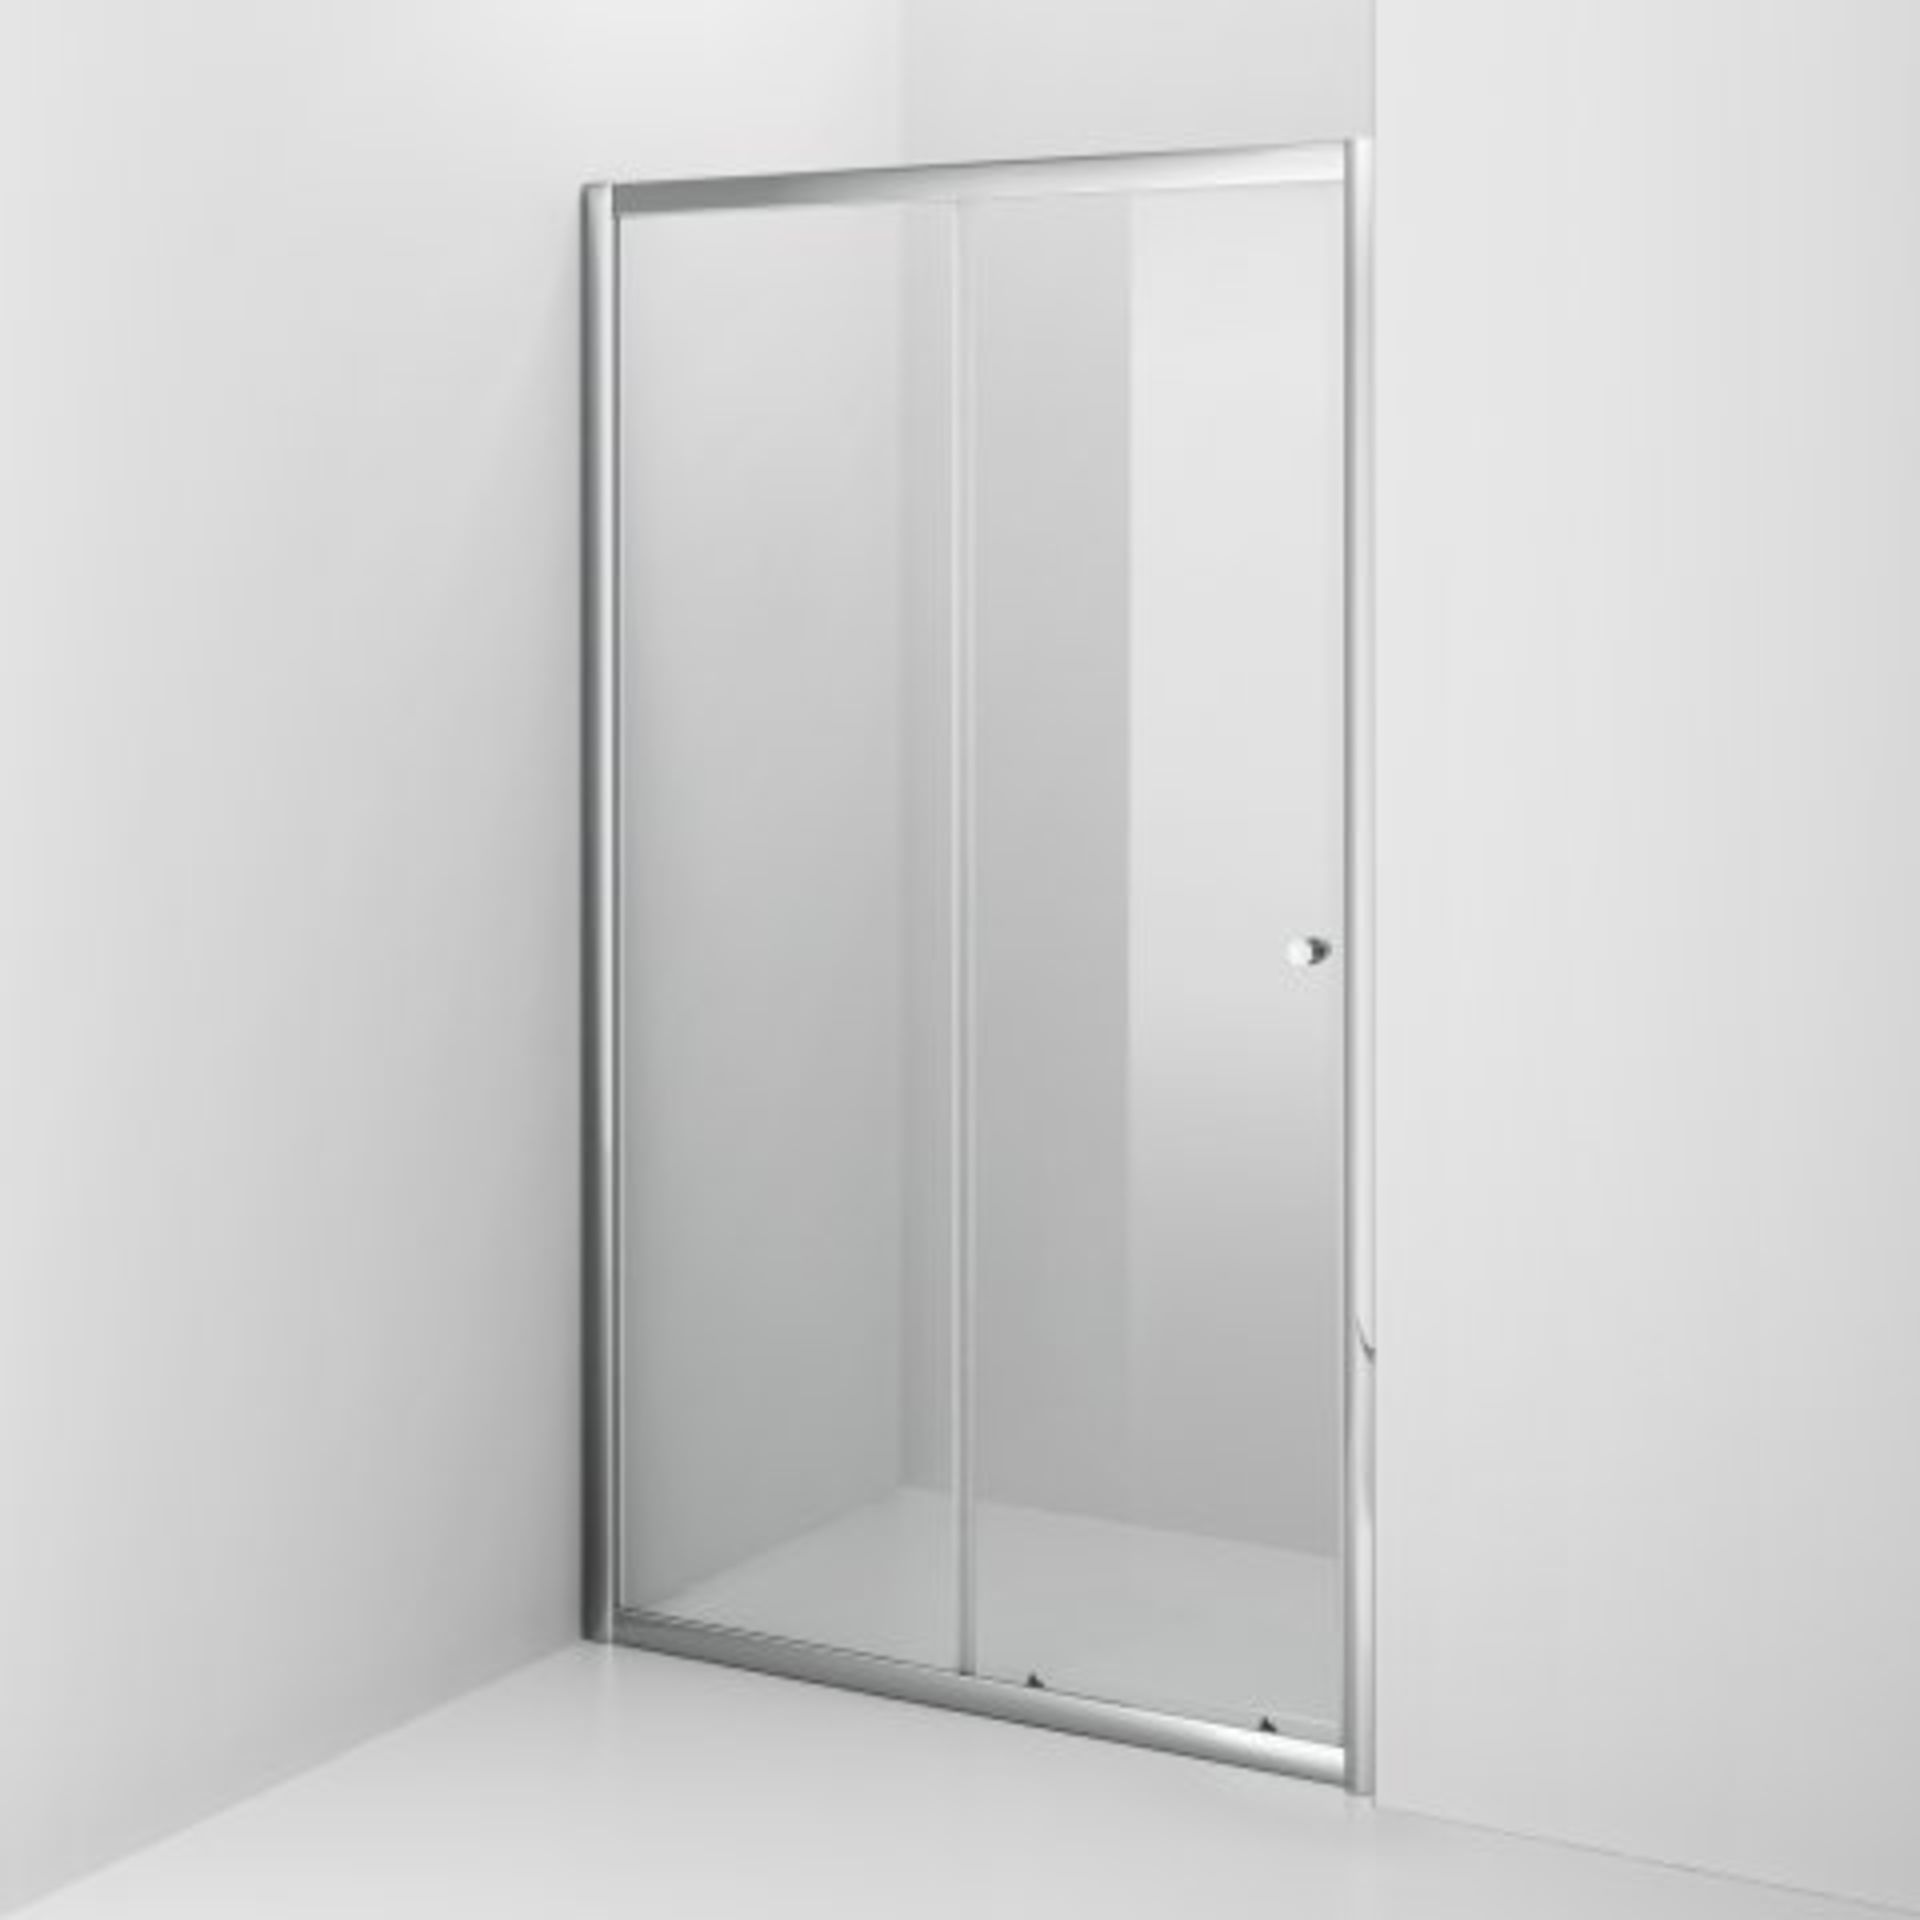 (N116) 1200mm - Elements Sliding Shower Door. RRP £299.99. Designed and crafted to improve the decor - Image 4 of 5